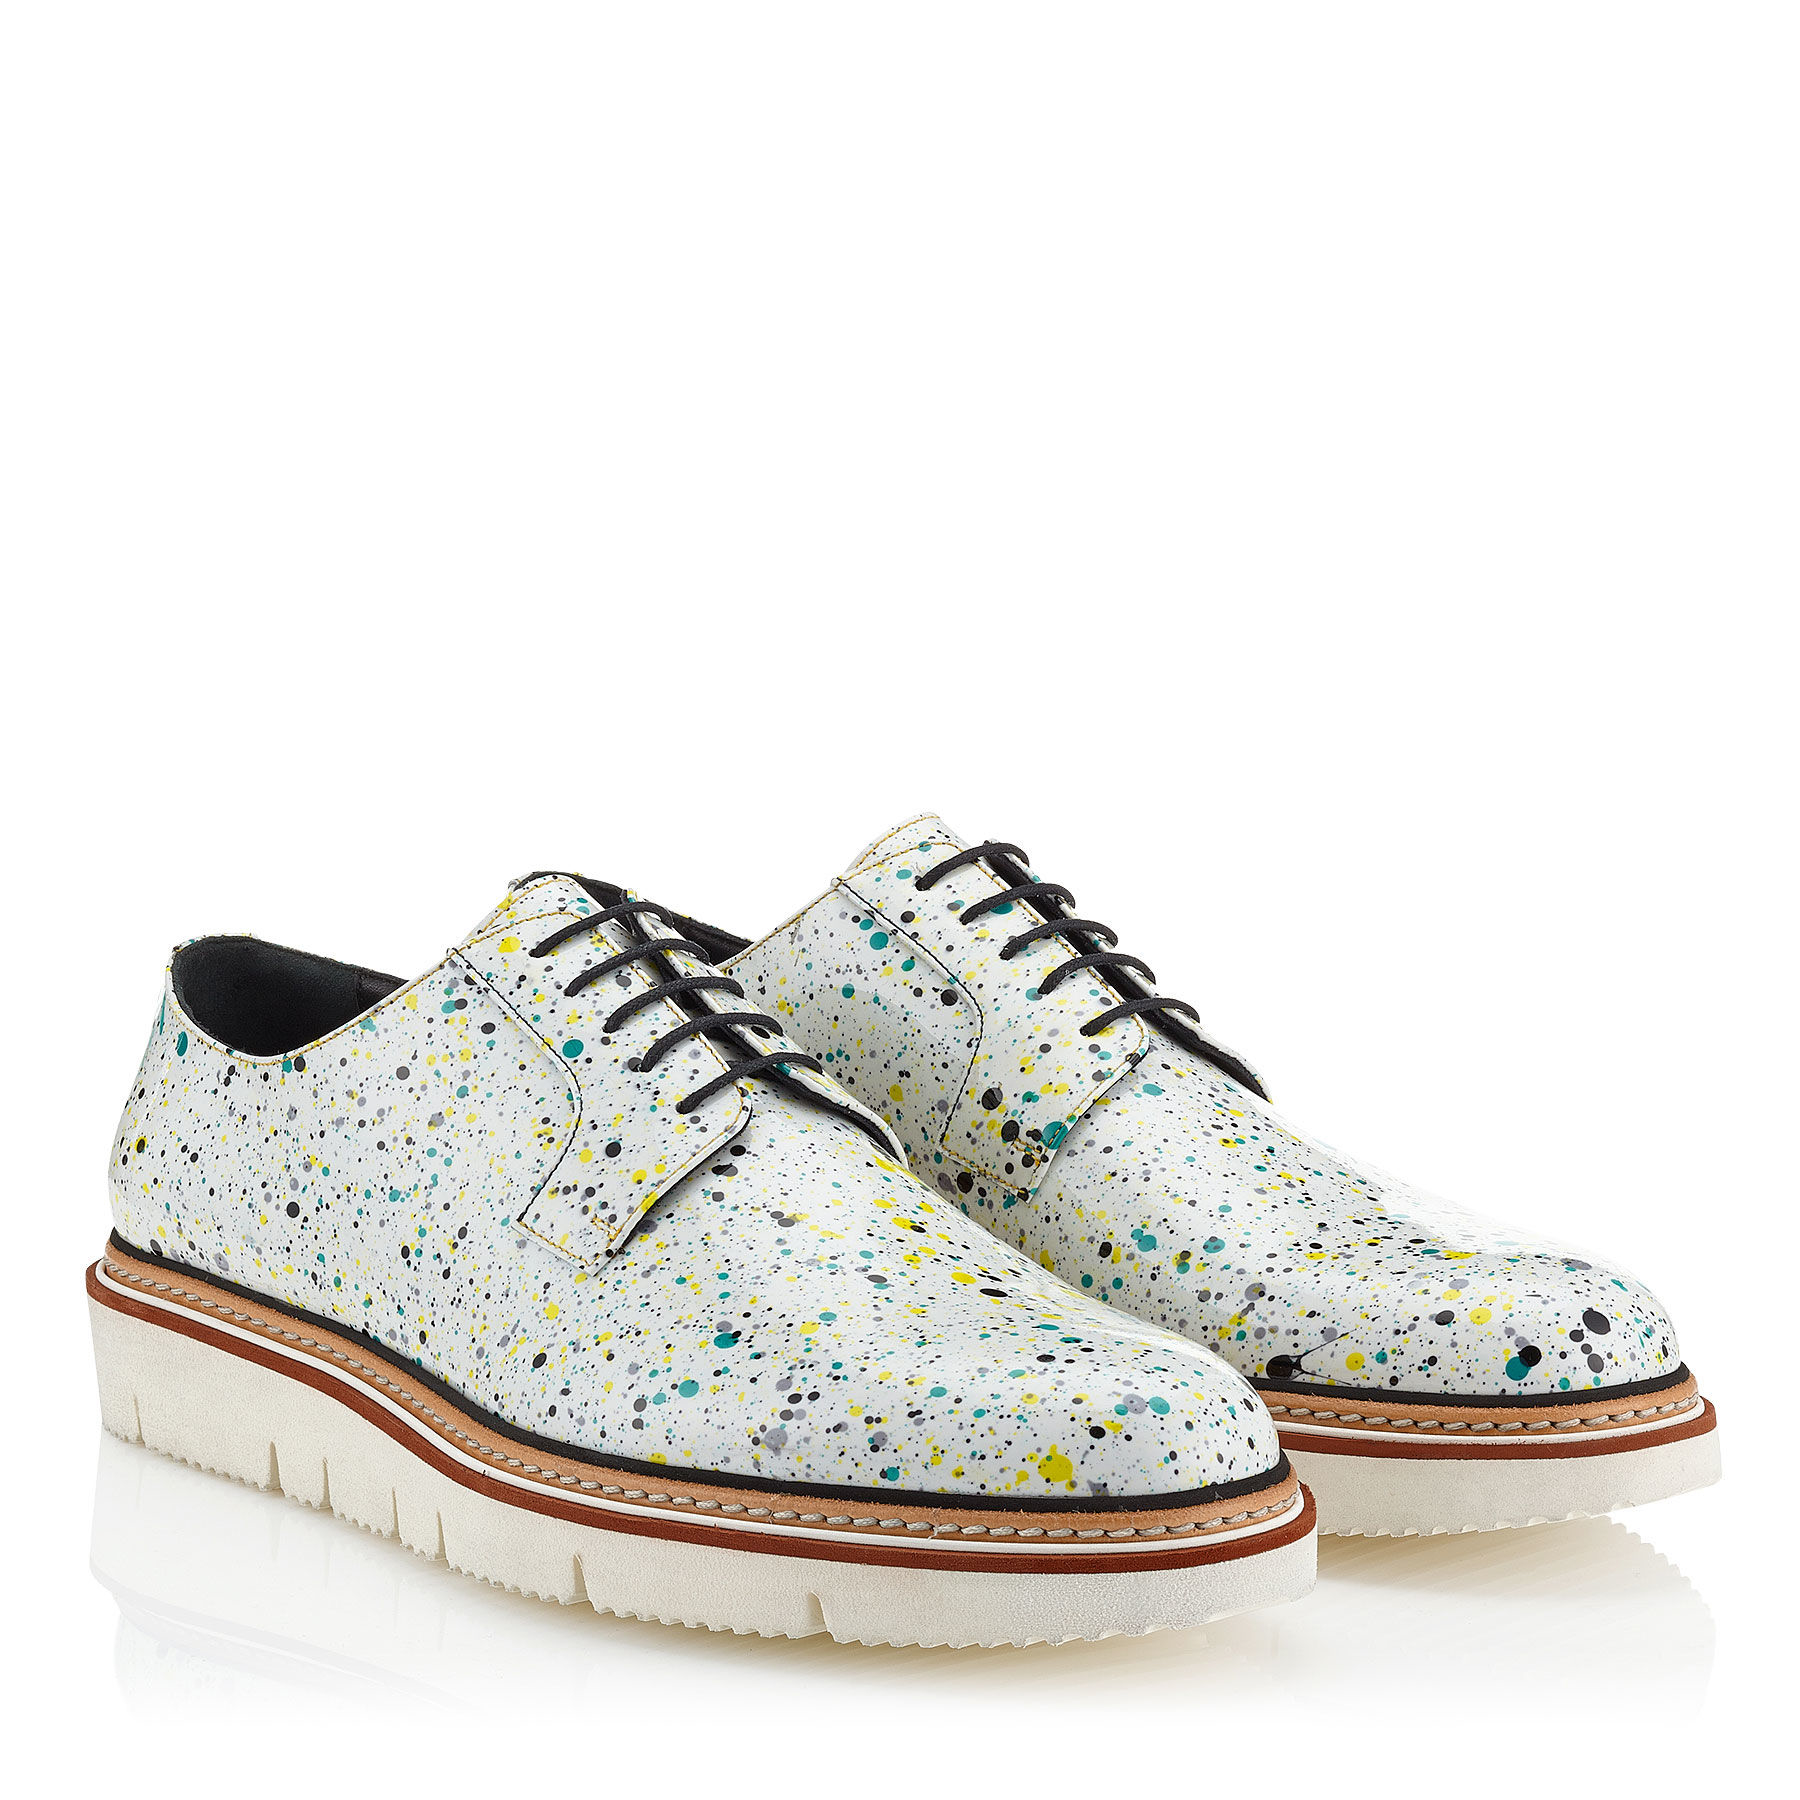 Lyst - Jimmy Choo Lars White Galaxy Patent Lace Up Shoes in White for Men